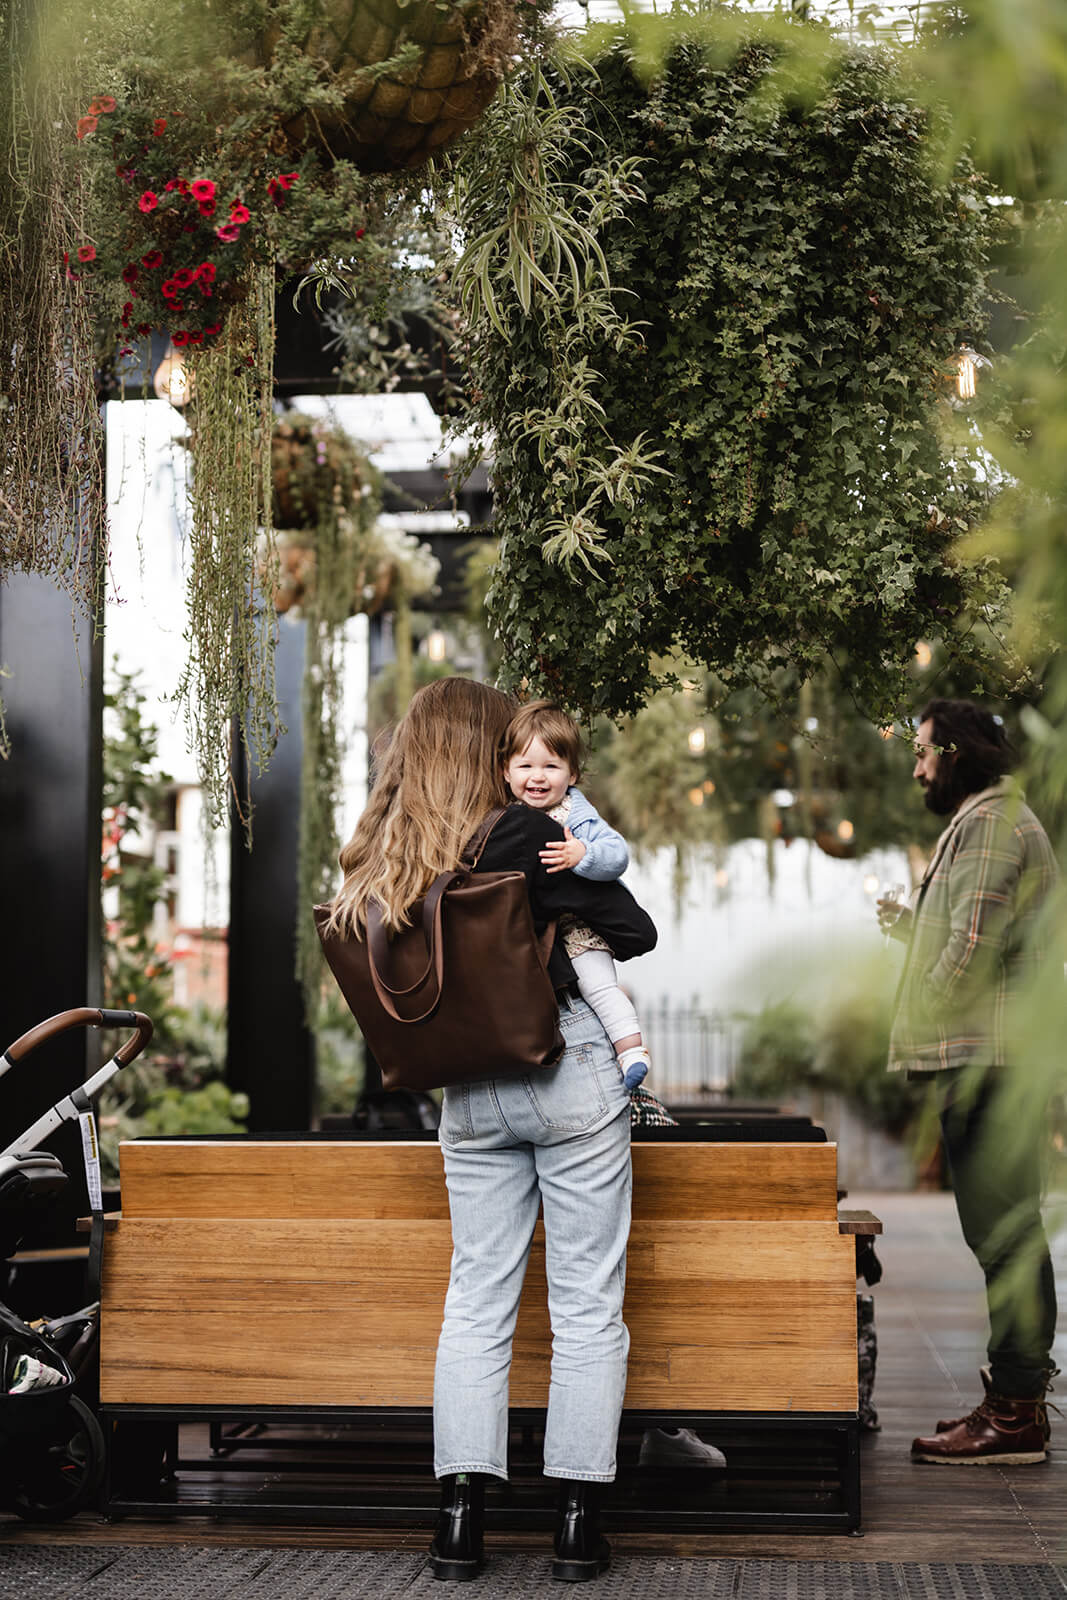 Woman with back to camera in an outdoor restaurant space with a lot of green foliage. She is holding a baby and she has a brown leather backpack on her back. The backpack is the Chocolate Brown Leather Backpack & Tote by Ella Jackson